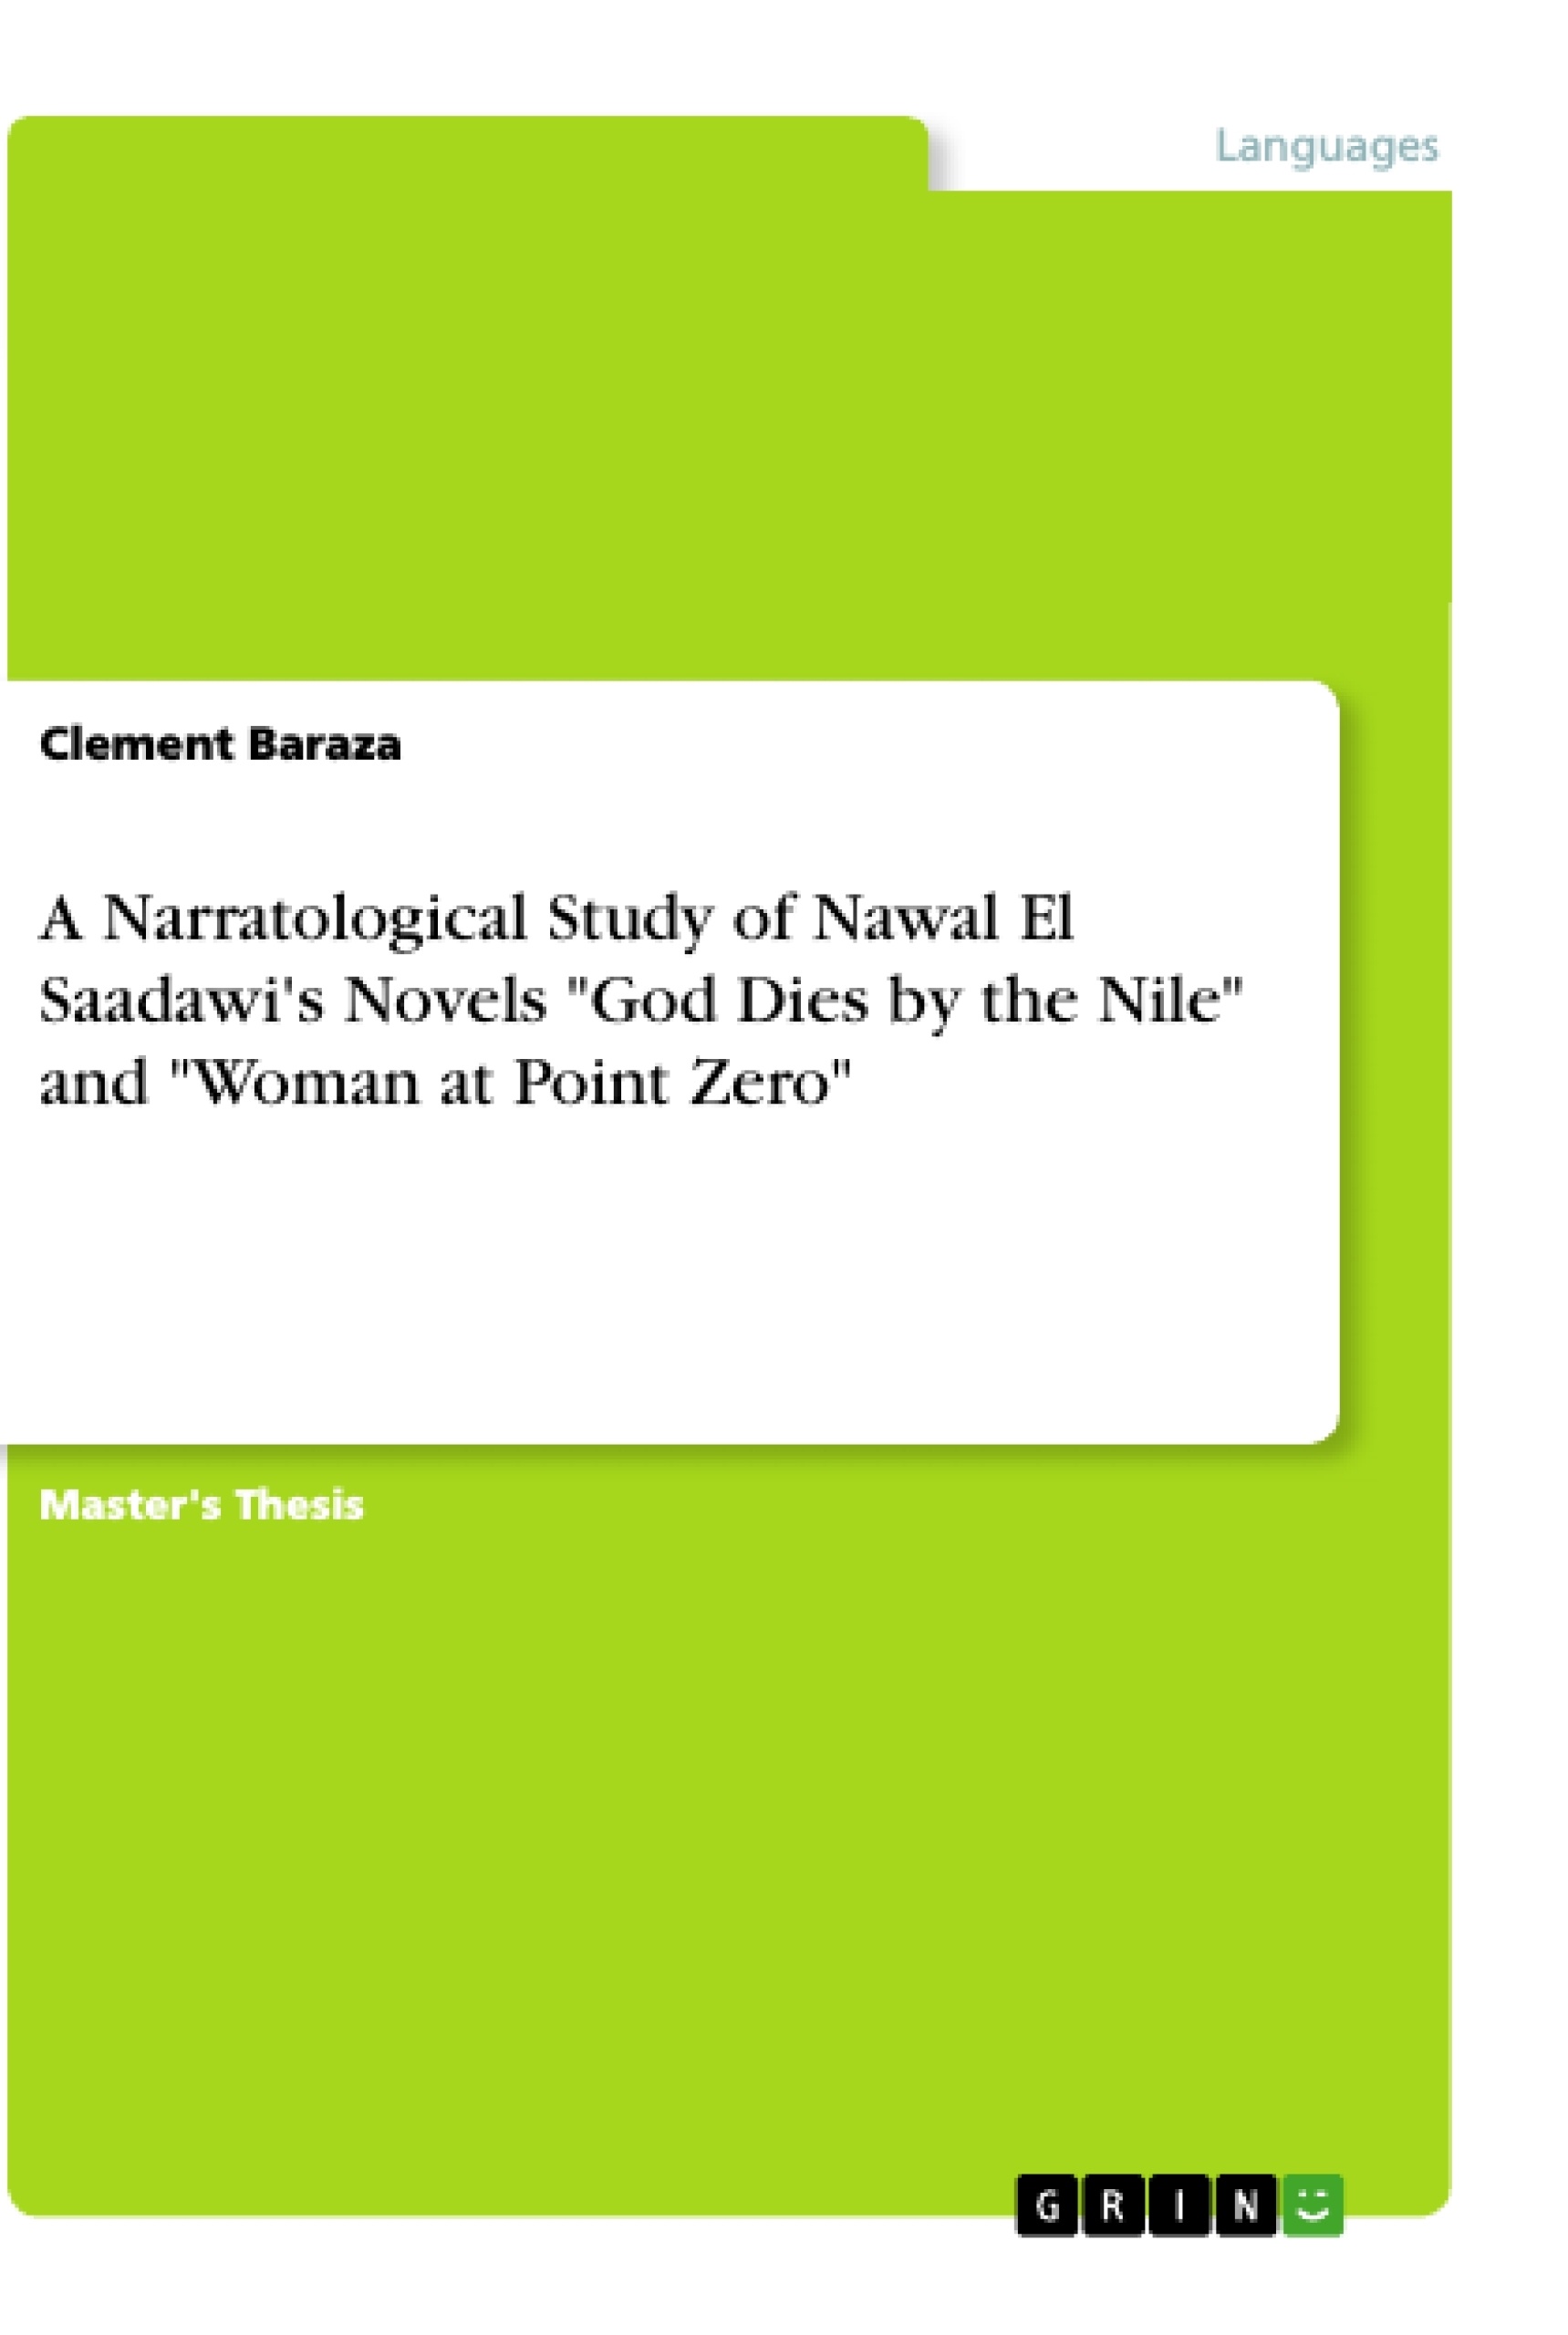 Titre: A Narratological Study of Nawal El Saadawi's Novels "God Dies by the Nile" and "Woman at Point Zero"